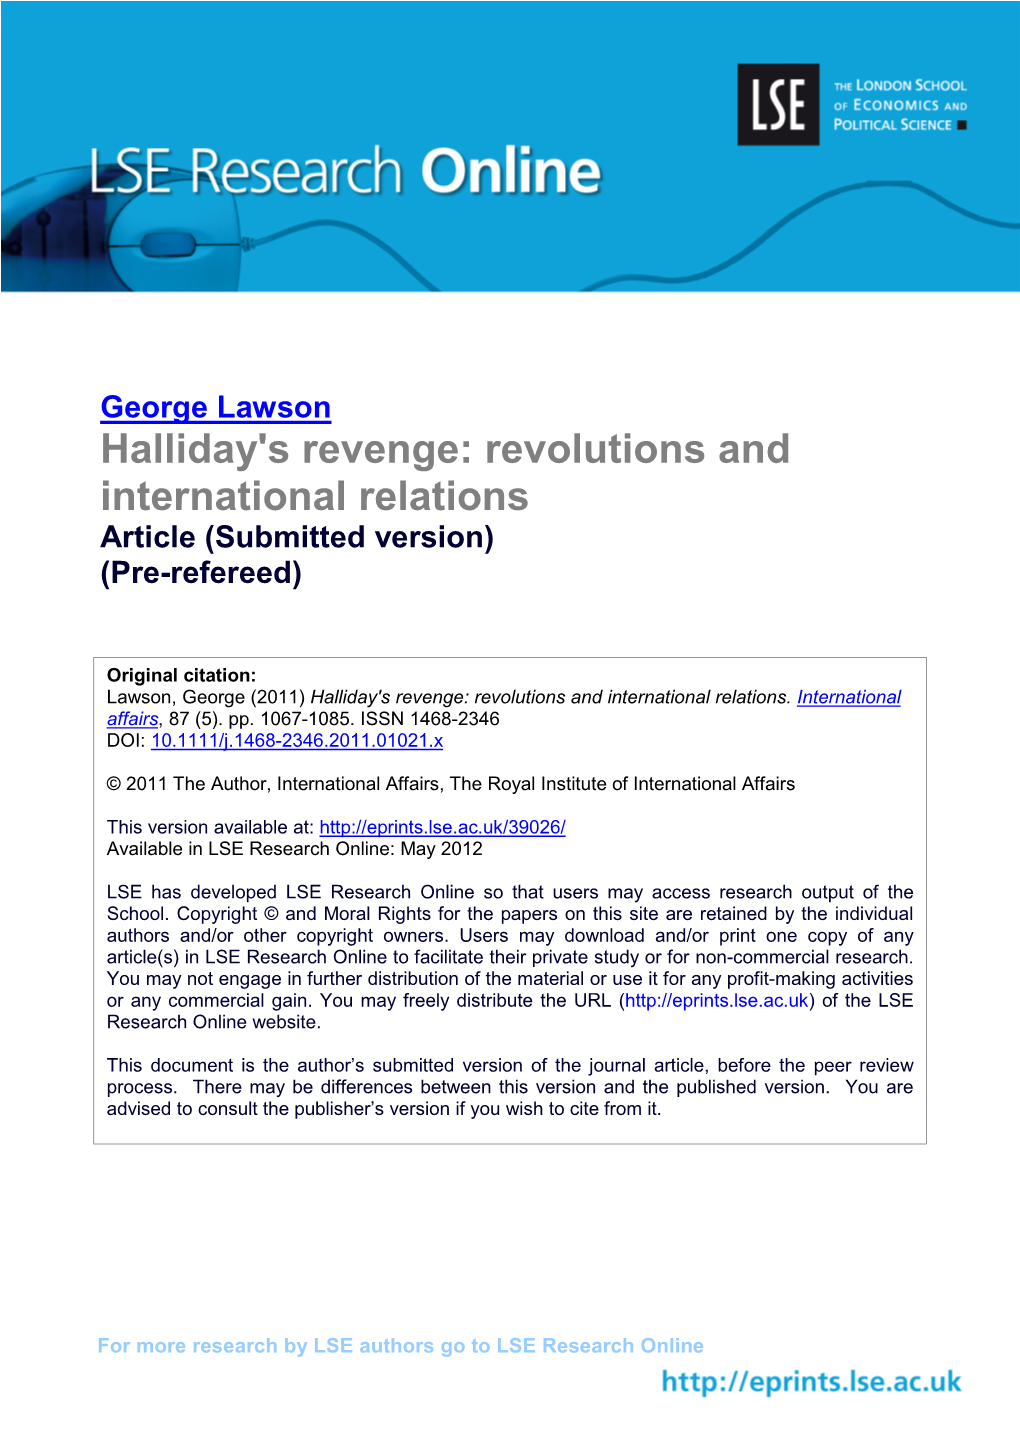 Halliday's Revenge: Revolutions and International Relations Article (Submitted Version) (Pre-Refereed)